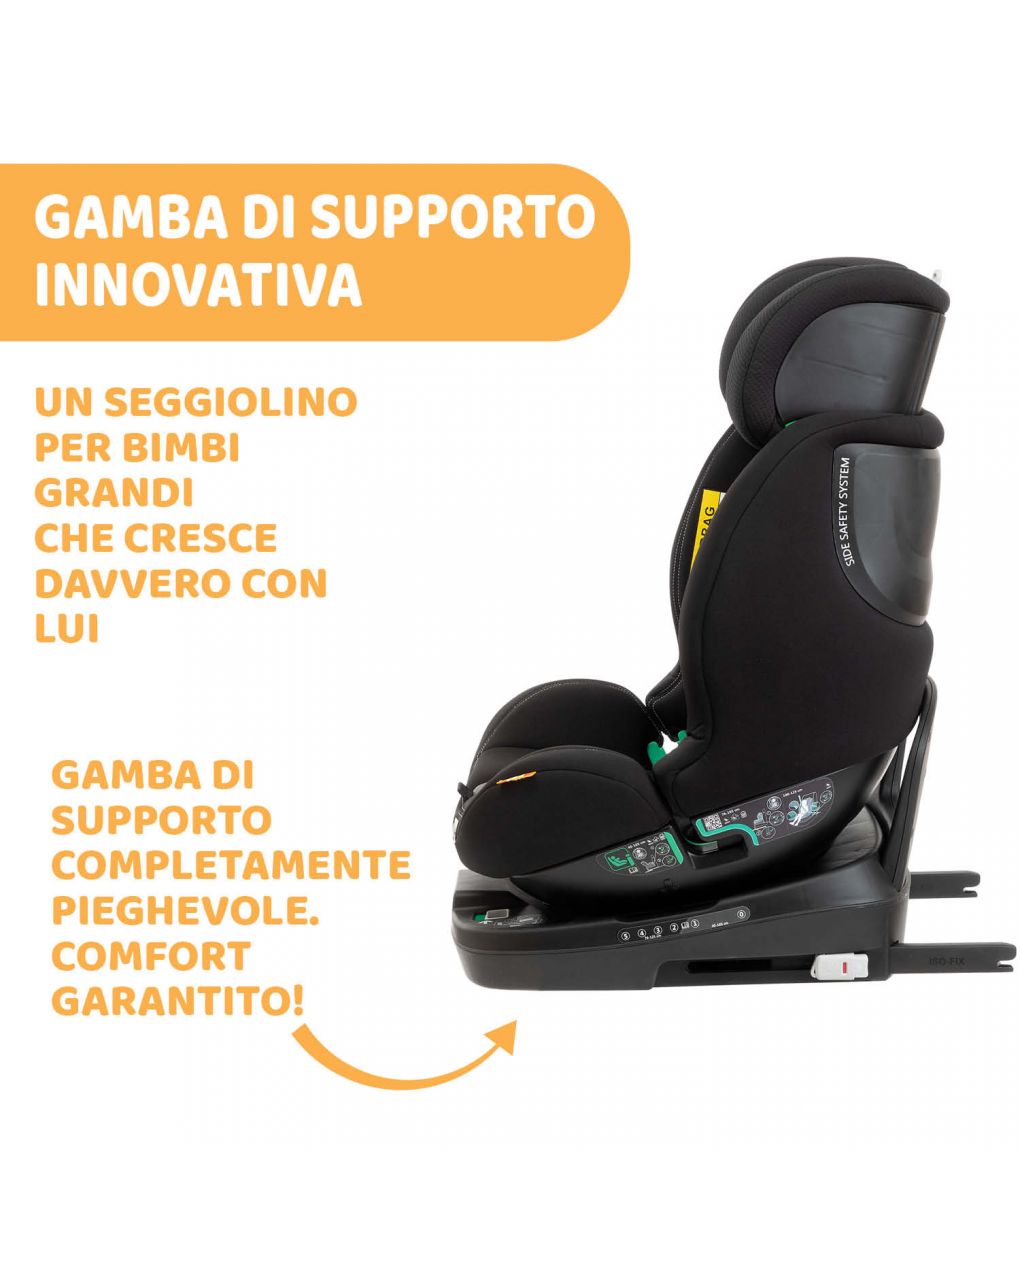 Chicco seat3fit i-size black - Chicco